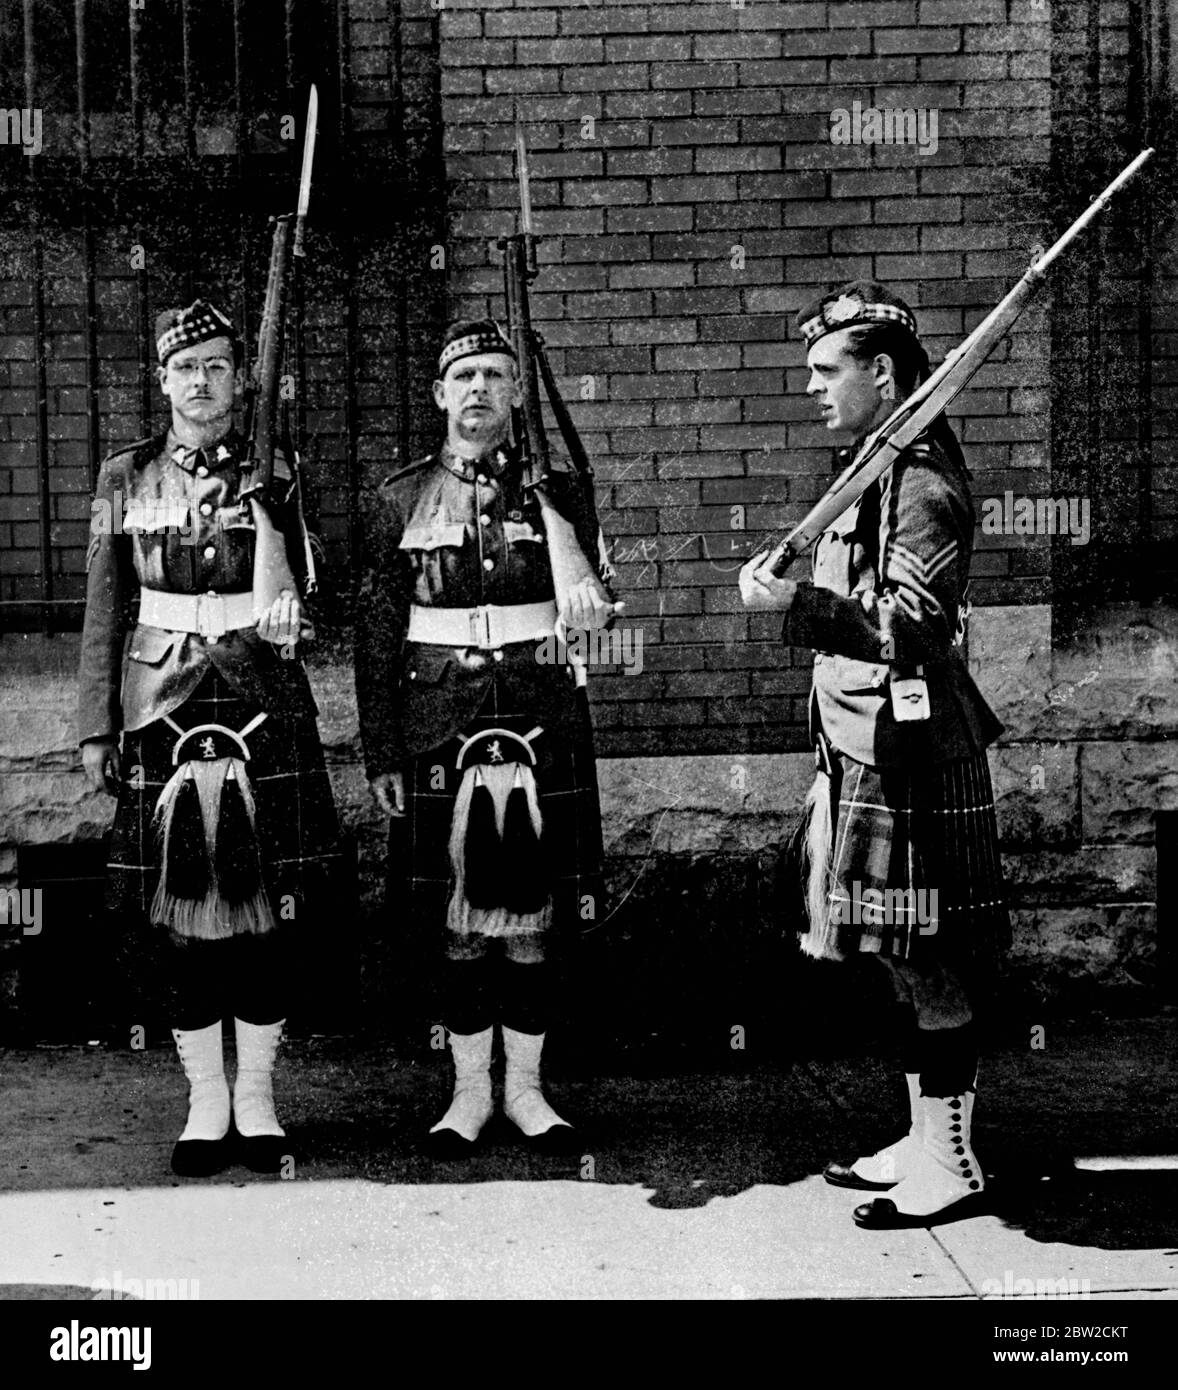 Canadian troops on constant guard in face of war scare Windsor, Ontario, Canada. Signs of Britain's preparations for war are visible these days along the Canadian - United States boundary. Here a change of guard is taking place as two fresh sentries come on duty at the Windsor Essex Scottish Regiment armoury, which has been under constant guard since Friday. 28 August 1939 Stock Photo